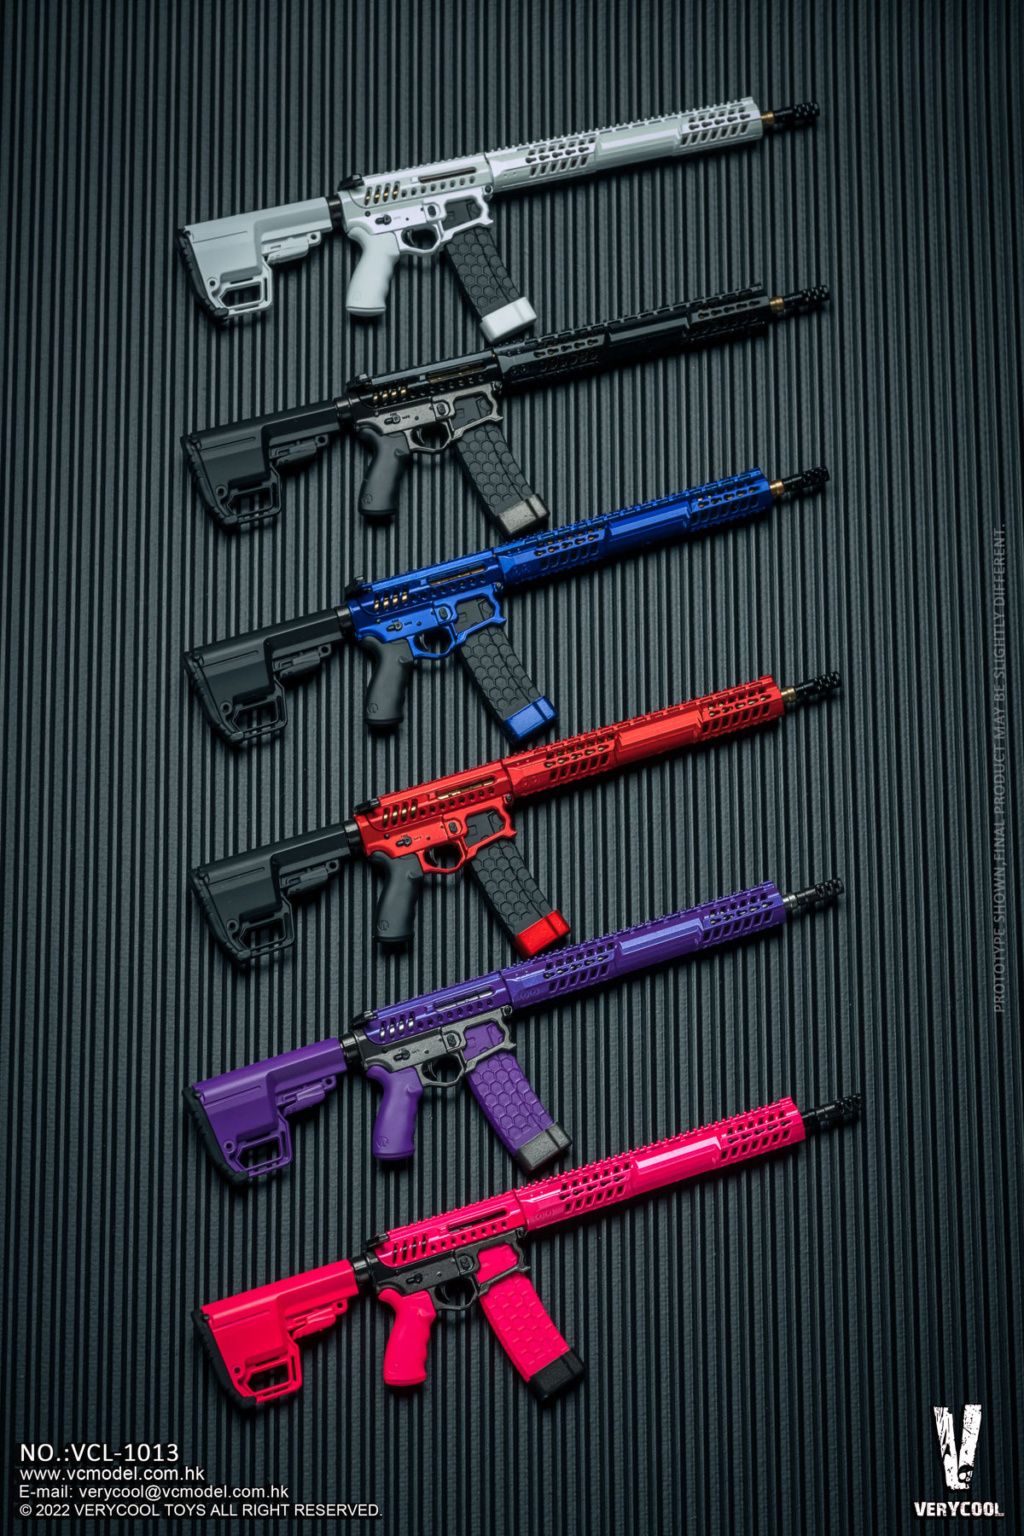 accessory - NEW PRODUCT: Verycool: 1/6 Scale Weapon Set - 01 (6 Colors in total) #VCL-1013 14464011